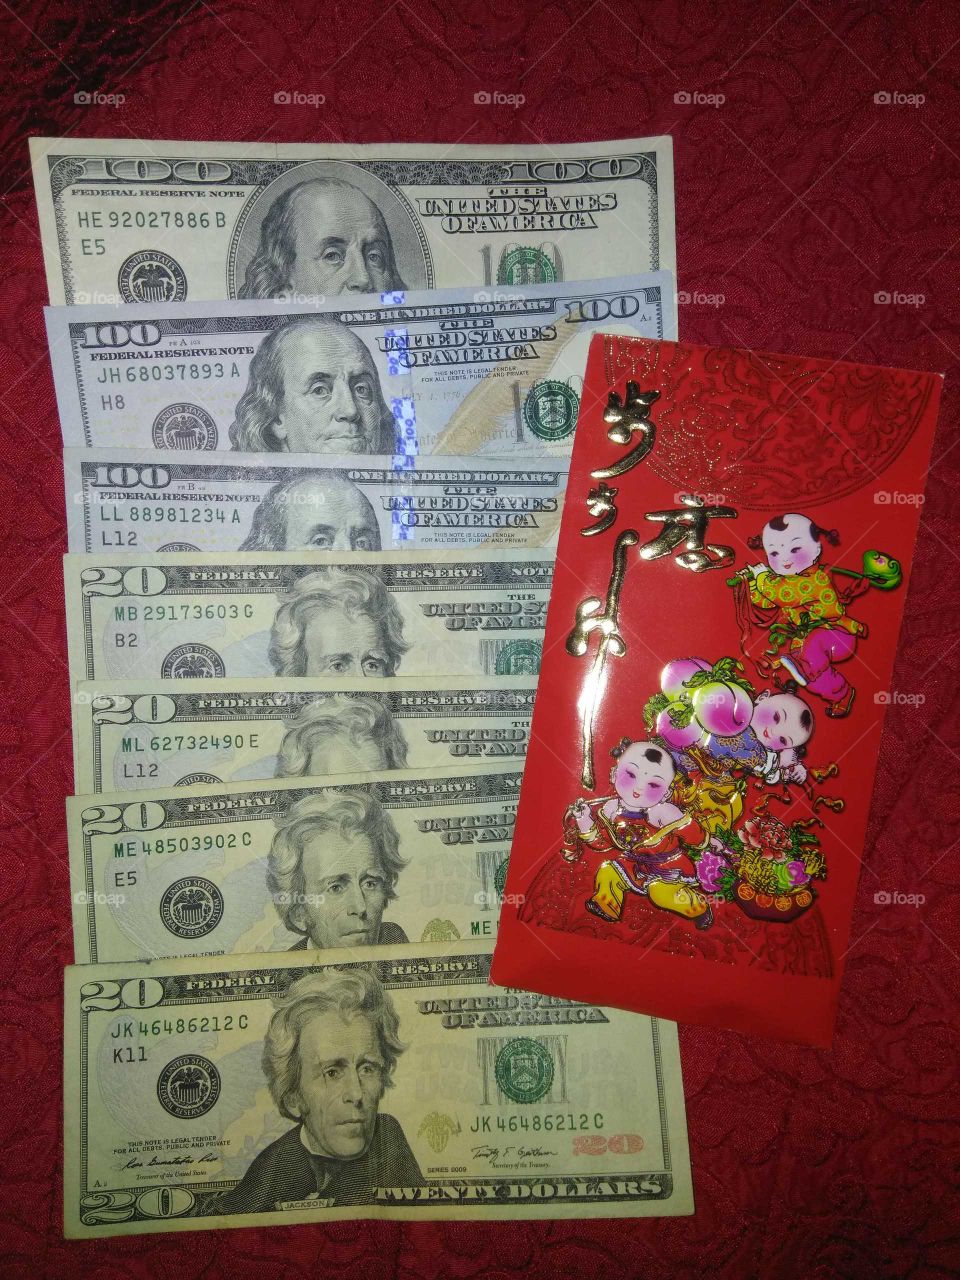 Feng Shui for Wealth and Prosperity with Red Envelope filled with Money